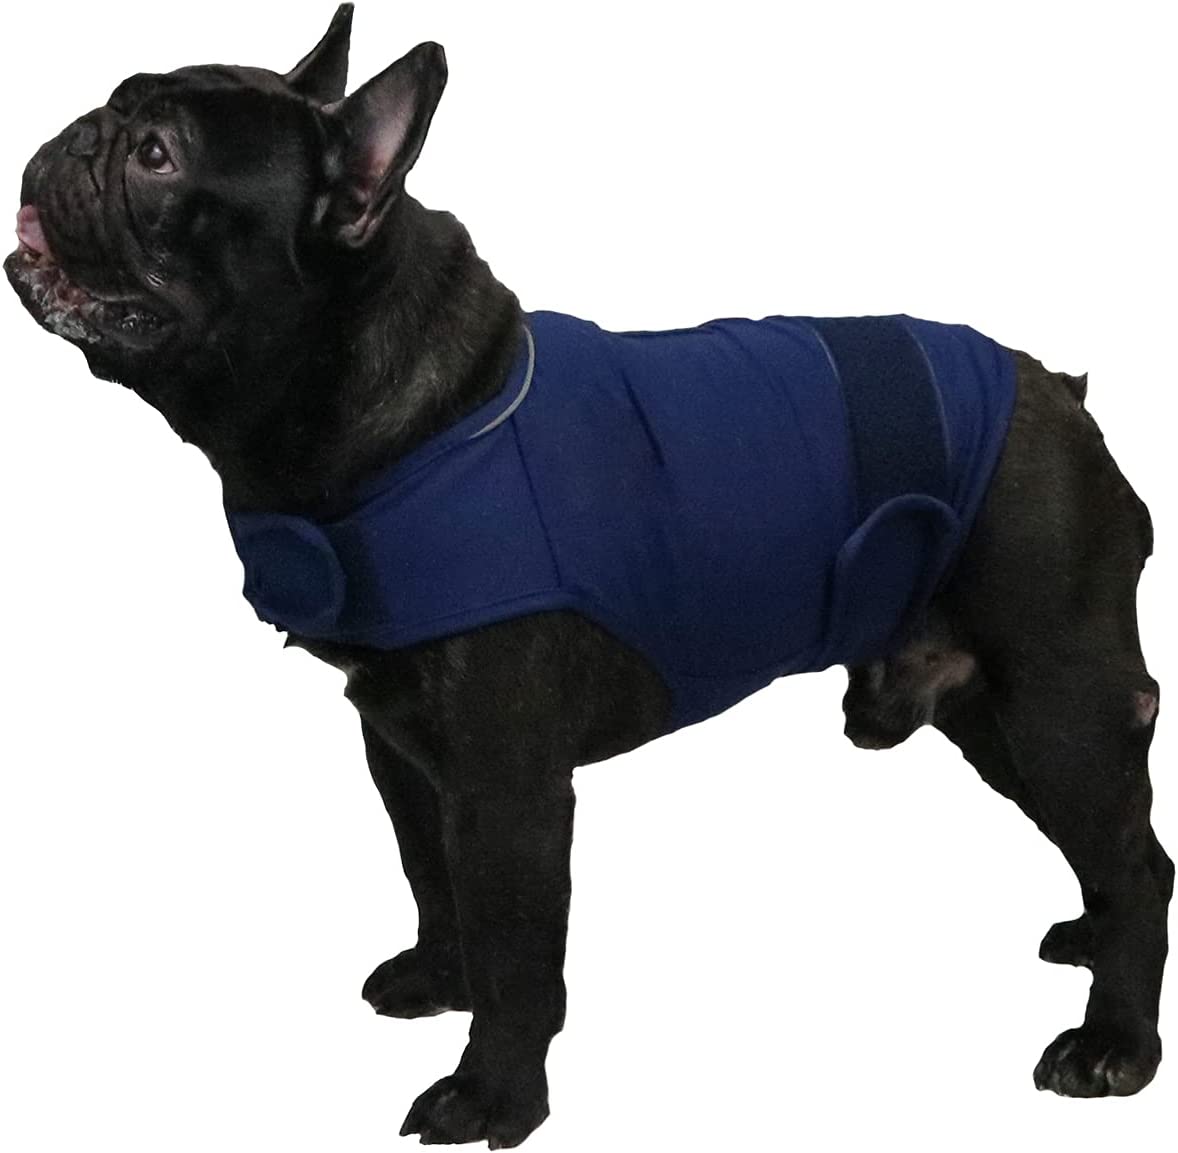  Comfort Dog Anxiety Relief Coat, Dog Anxiety Calming Vest Wrap for Thunderstorm,Travel,4th of July Fireworks,Vet Visits,Separation Anxiety Relief for Dogs (X-Small (Pack of 1), Rose)